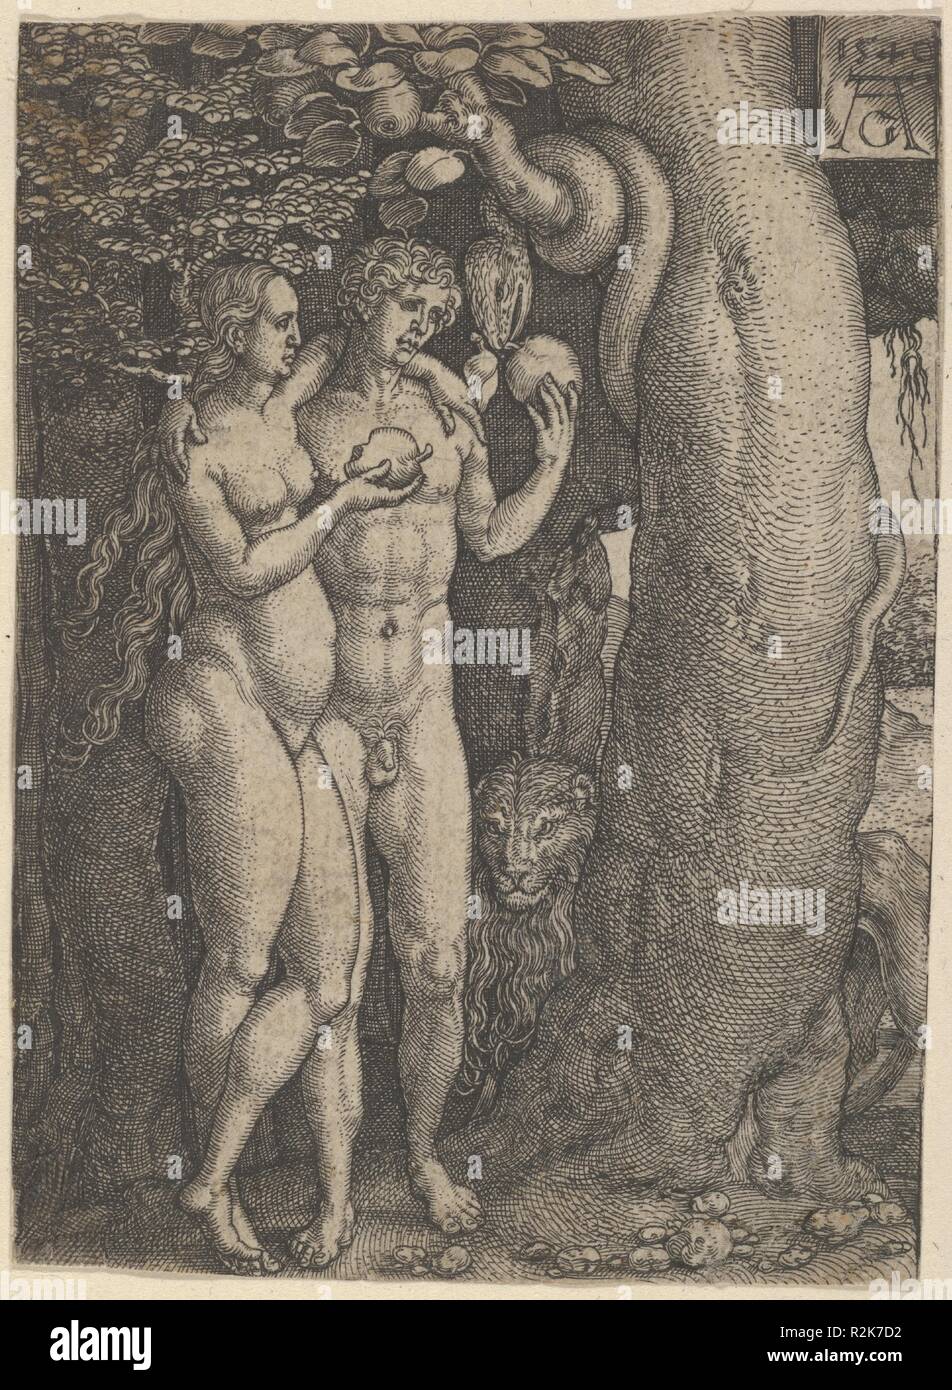 The Temptation of Adam and Eve, from The Story of Adam and Eve. Artist: Heinrich Aldegrever (German, Paderborn ca. 1502-1555/1561 Soest). Dimensions: Sheet: 3 3/8 × 2 1/2 in. (8.6 × 6.3 cm). Date: 1540.  Adam and Eve stand to the left of the Tree of Knowledge, each holding up fruit. The serpent is wrapped around a branch at top center and a lion is visible behind the tree. Based on Genesis 3:1-7. Plate 3 from a series of six engravings. Museum: Metropolitan Museum of Art, New York, USA. Stock Photo